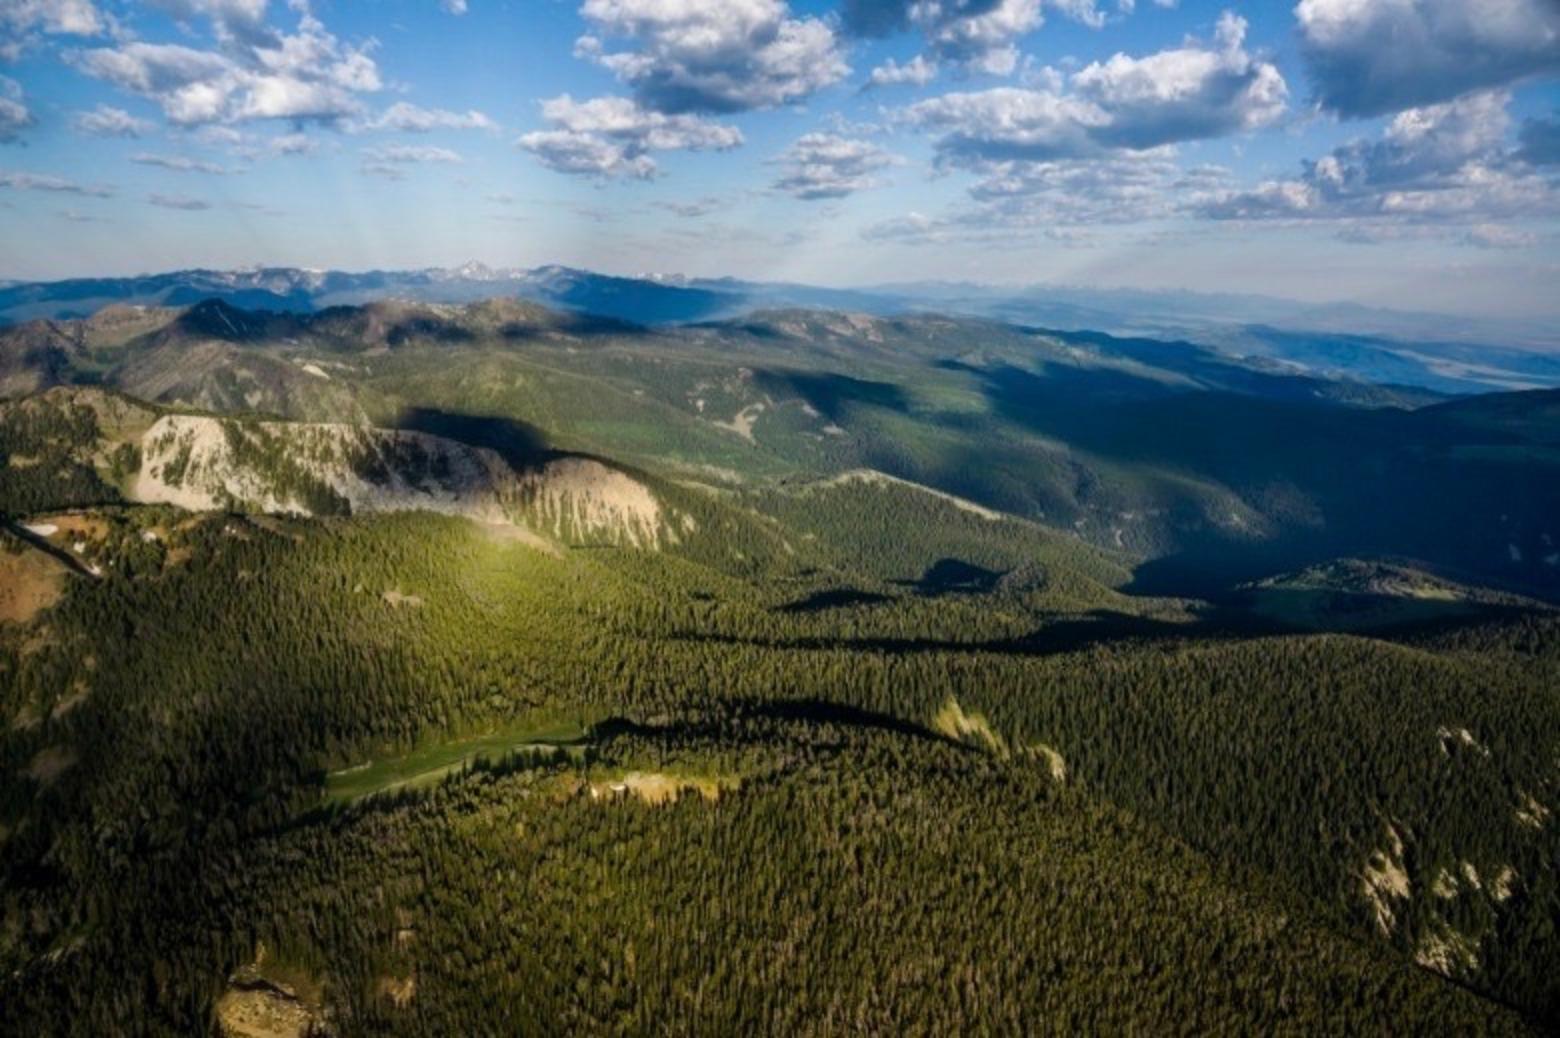 The Gallatin Range and part of the Hyalite Porcupine Buffalo Horn Wilderness Study Area. Were the Gallatin Range a national park unto itself, it would rank among the wildest national parks south of Canada, based on the wildlife diversity that currently exists there, 